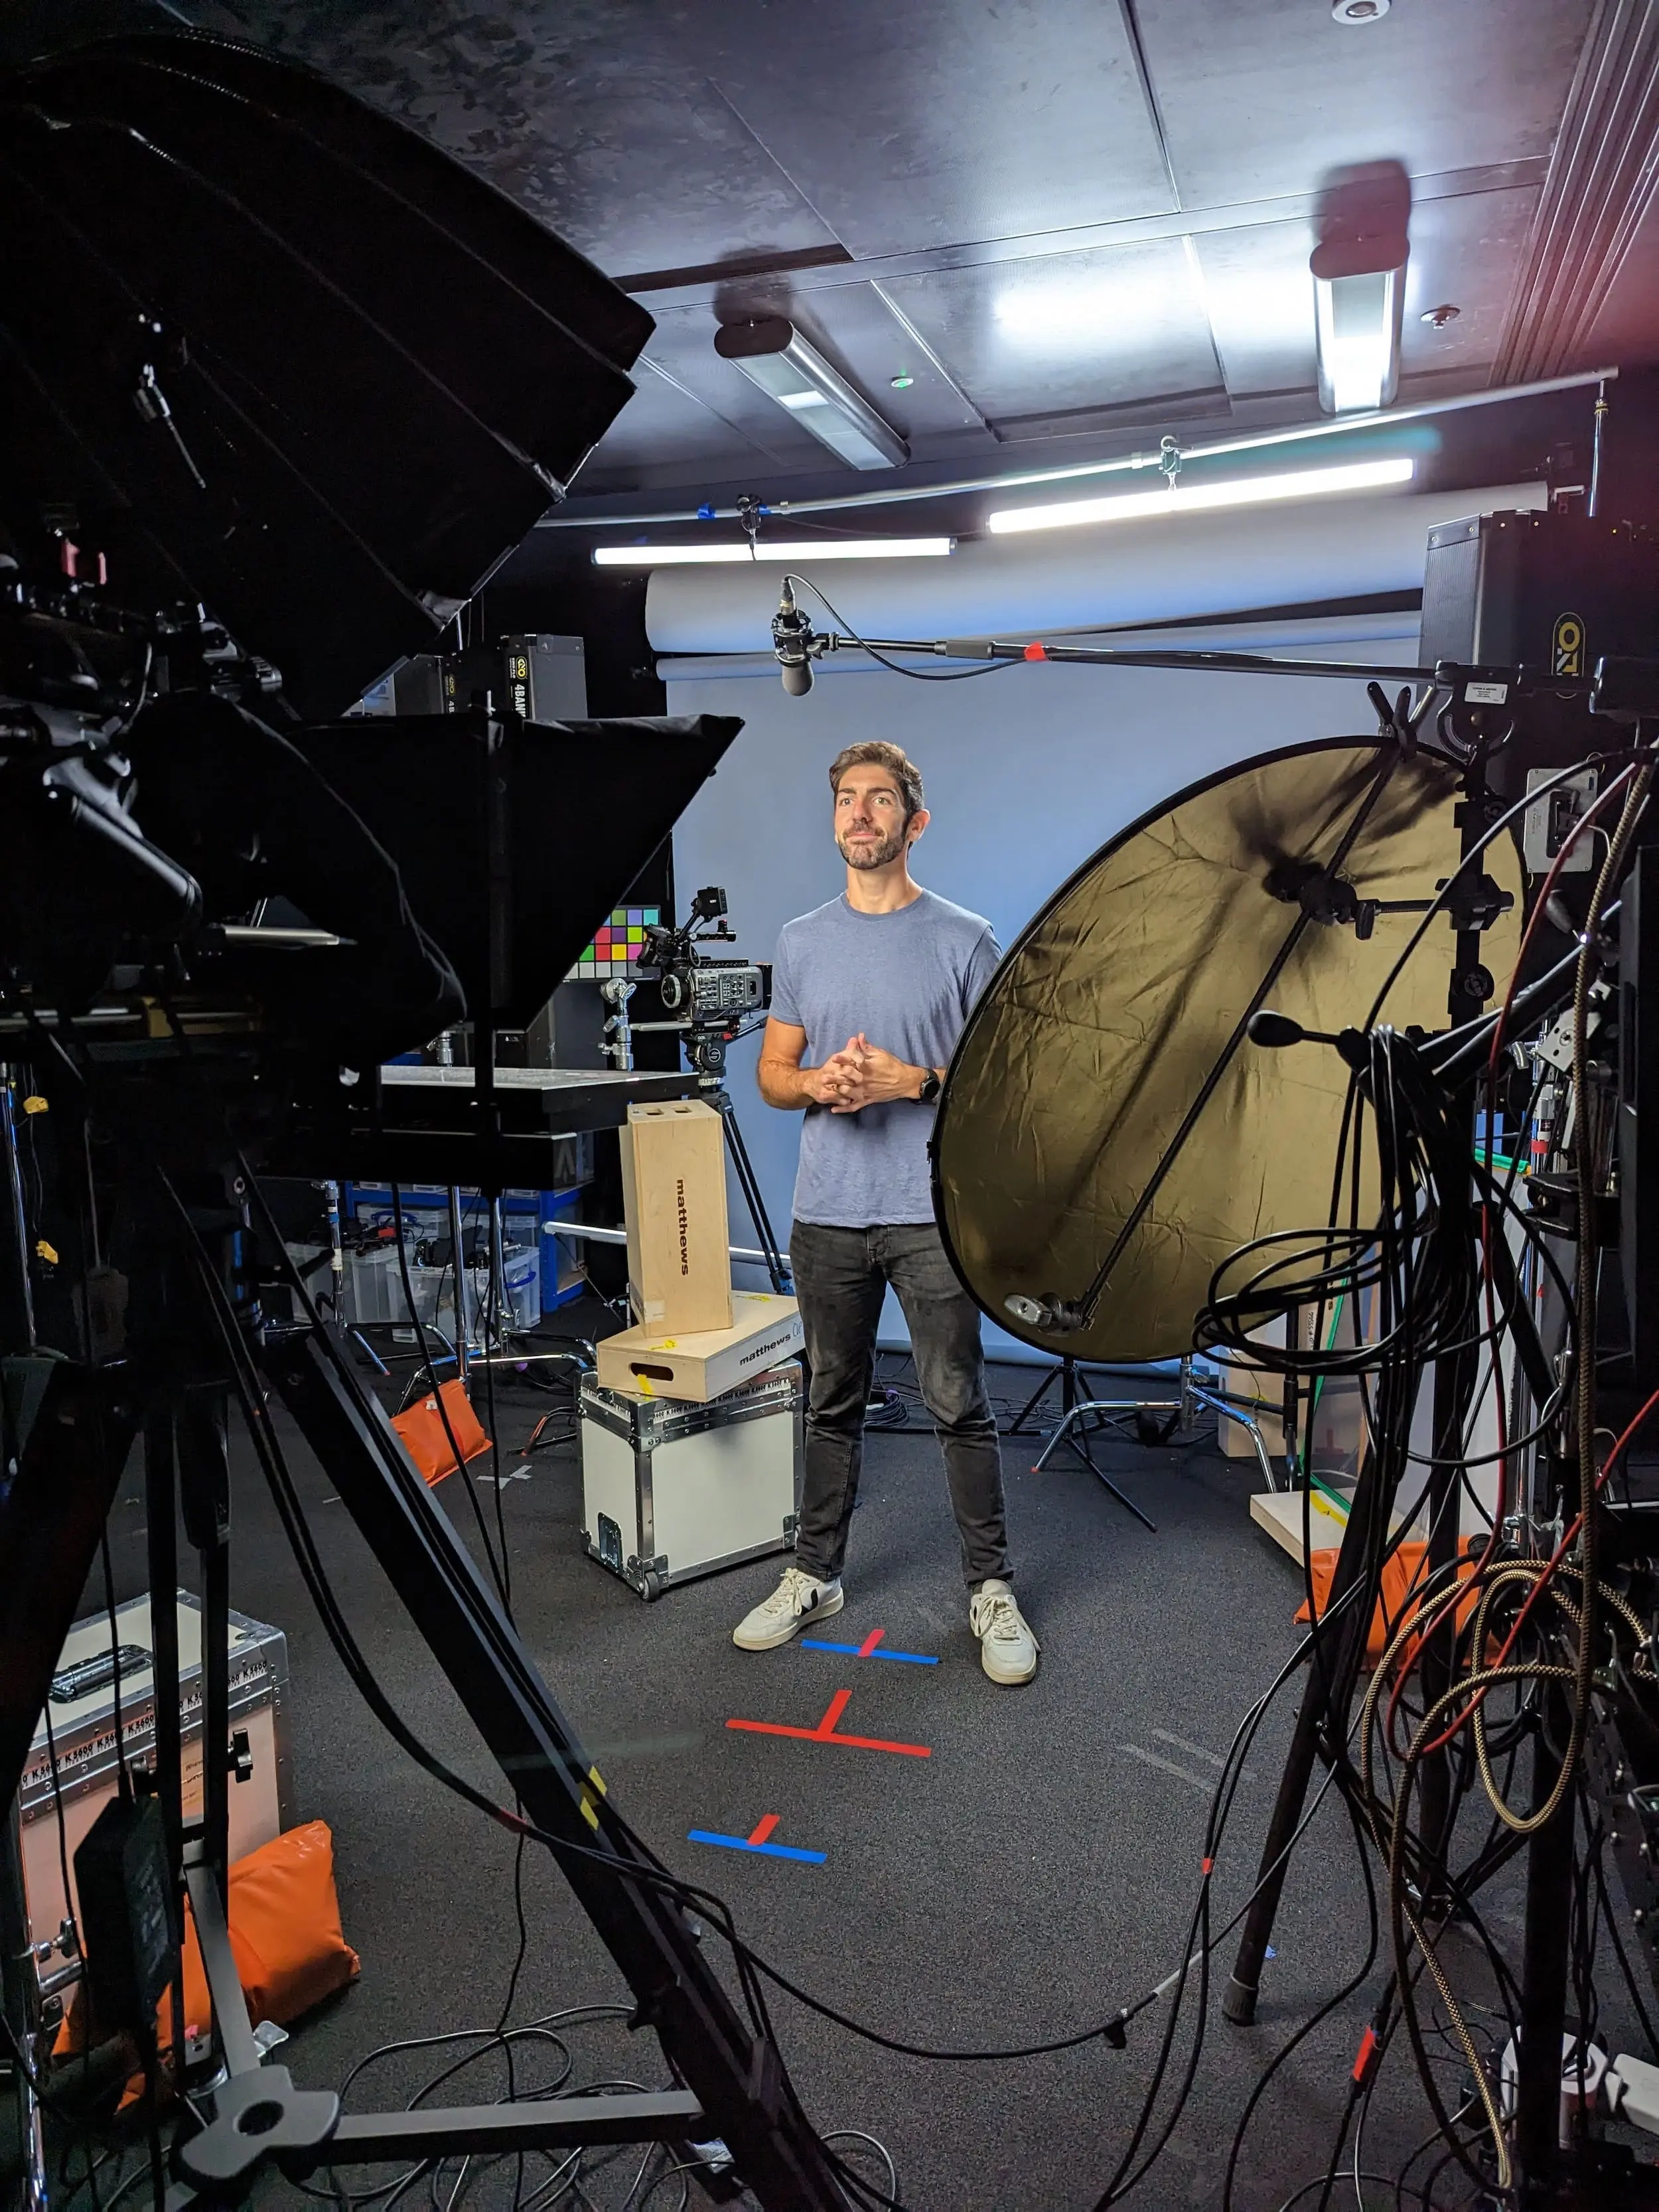 Recording a video in the Google office